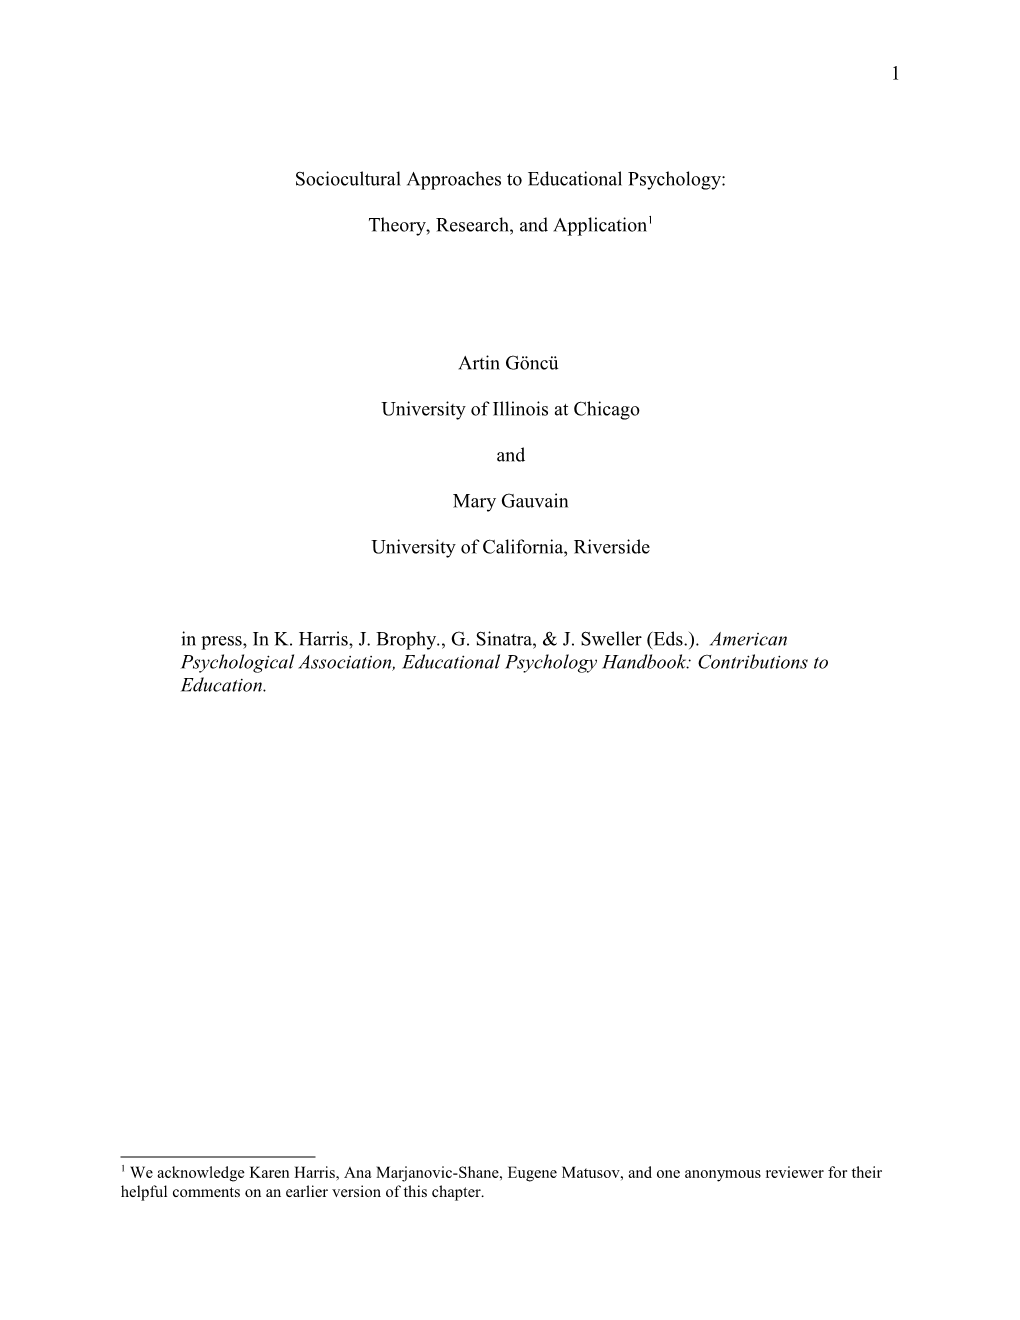 Sociocultural Approaches to Educational Psychology: Theory, Research, and Application